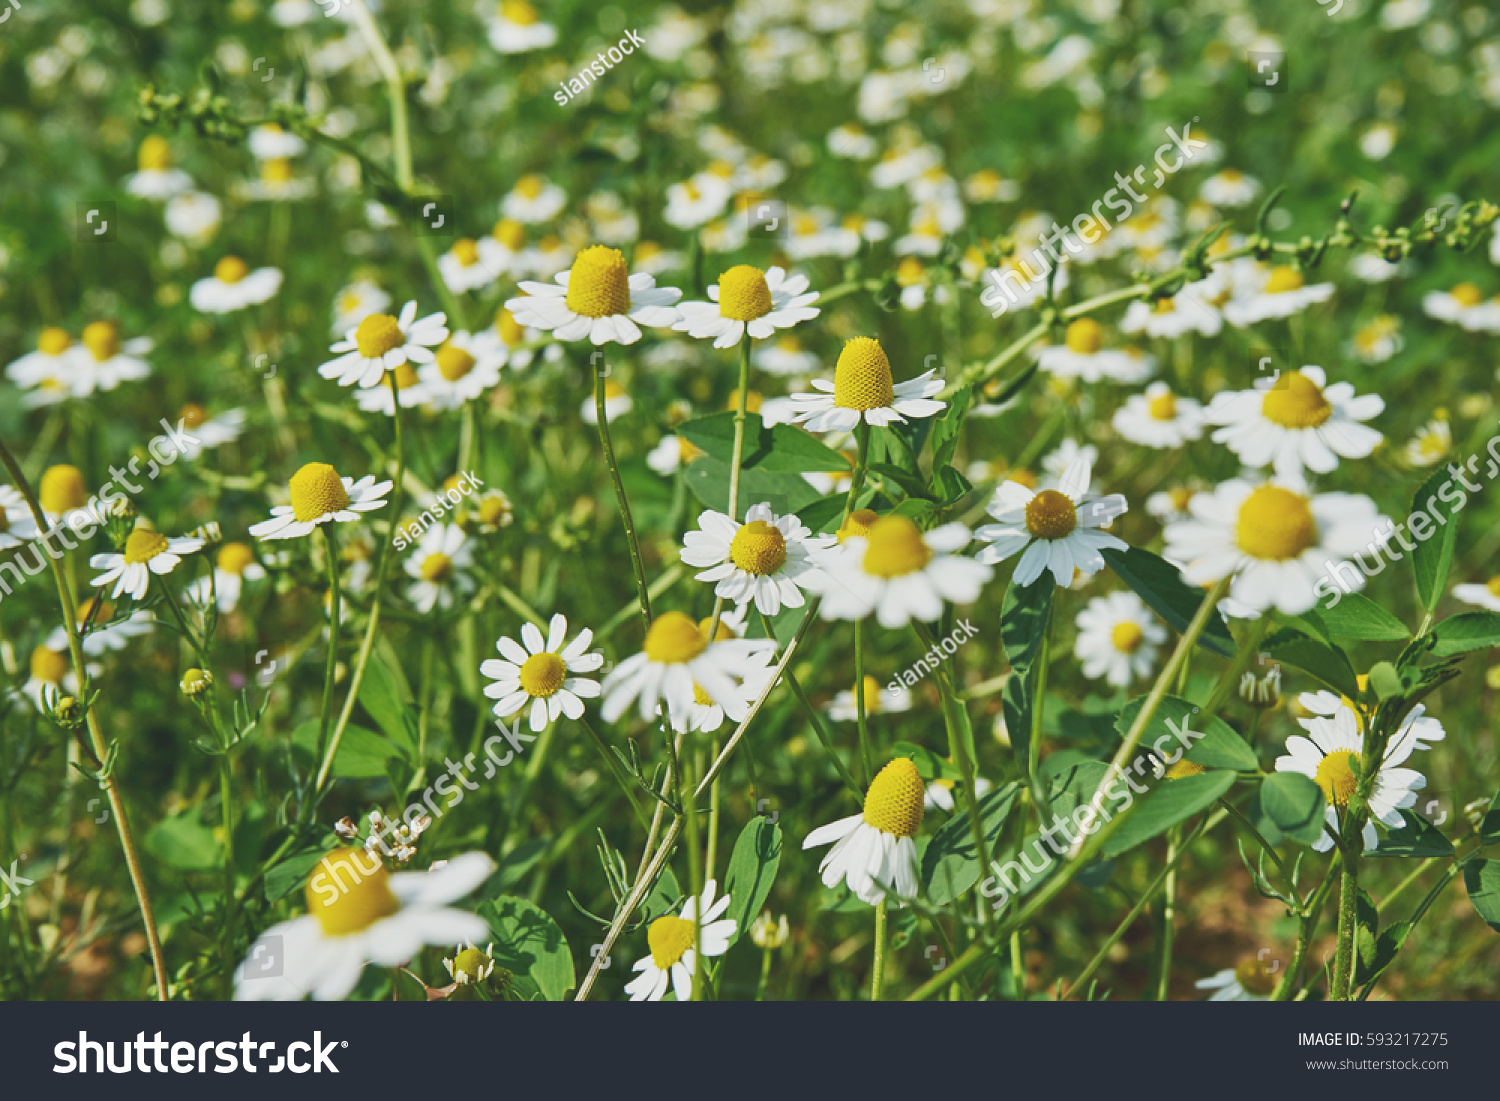 Daisies in the field  #593217275